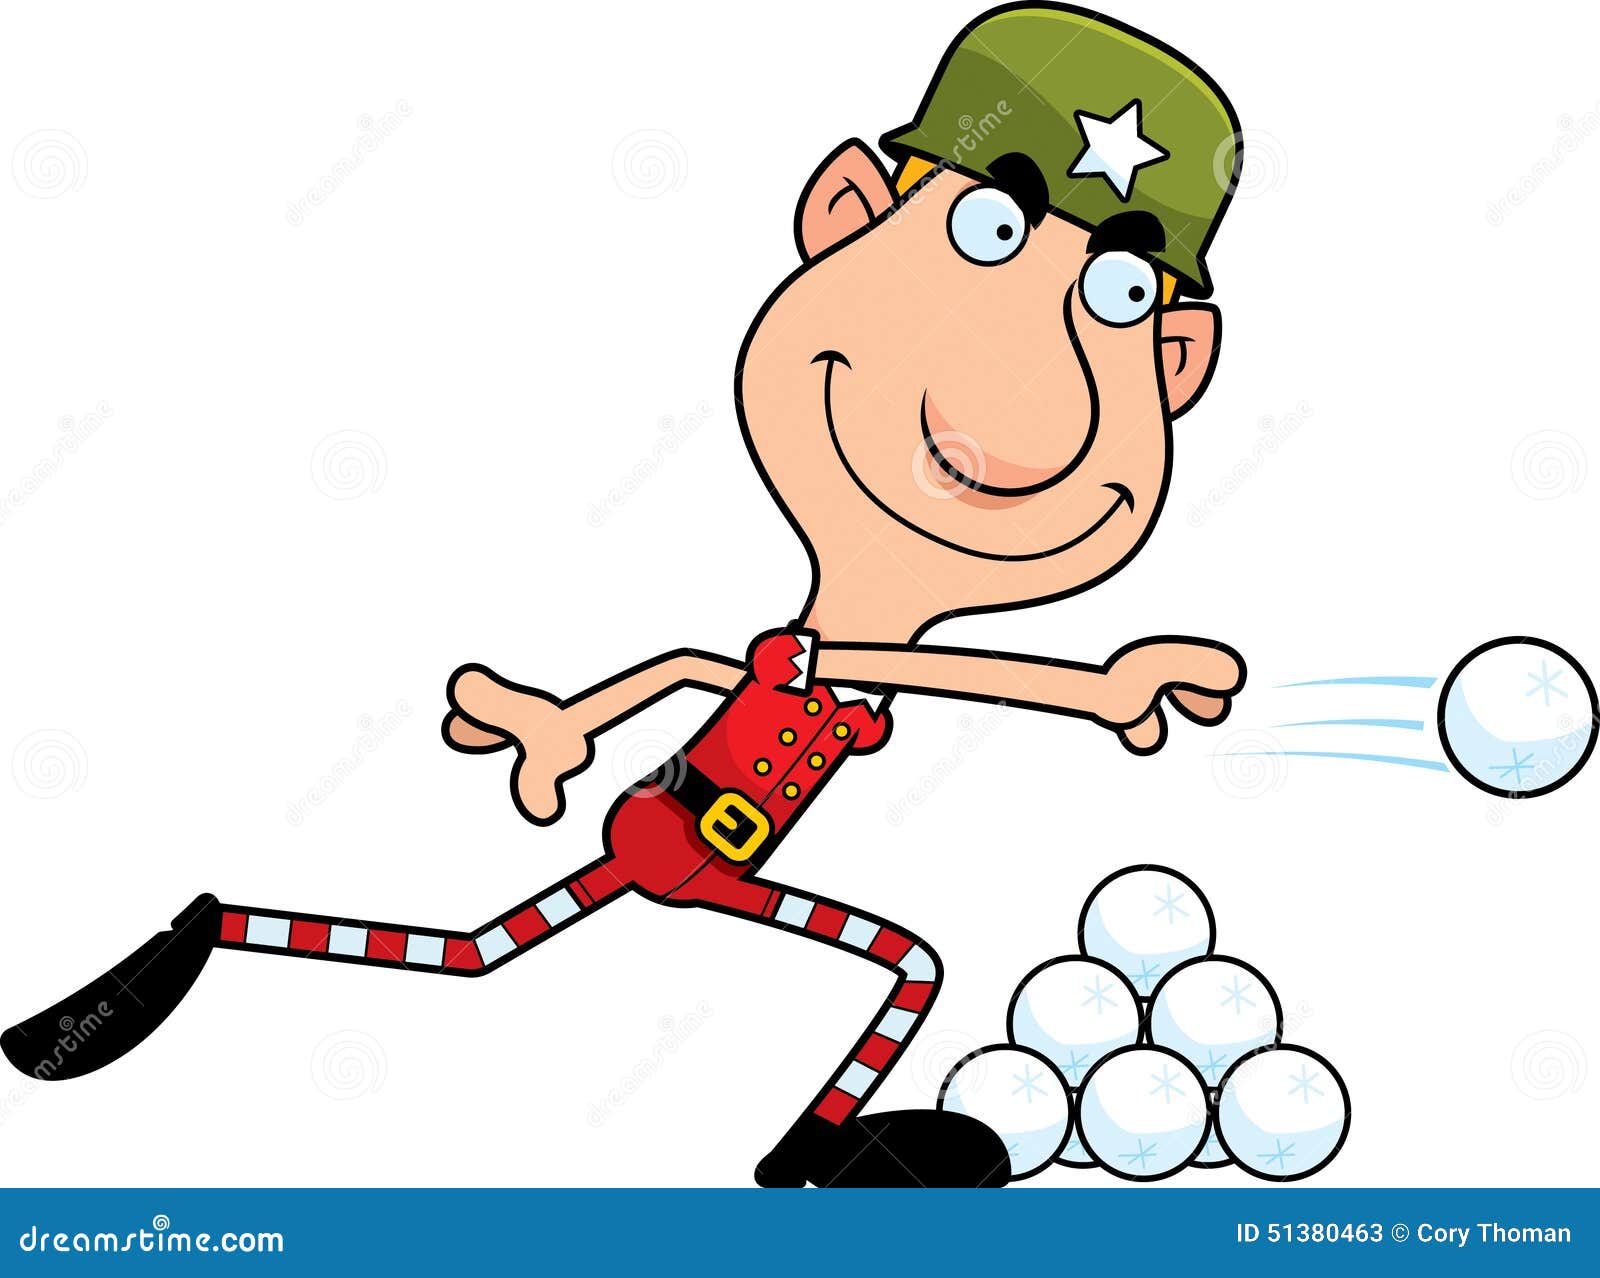 clipart snowball fight - photo #20